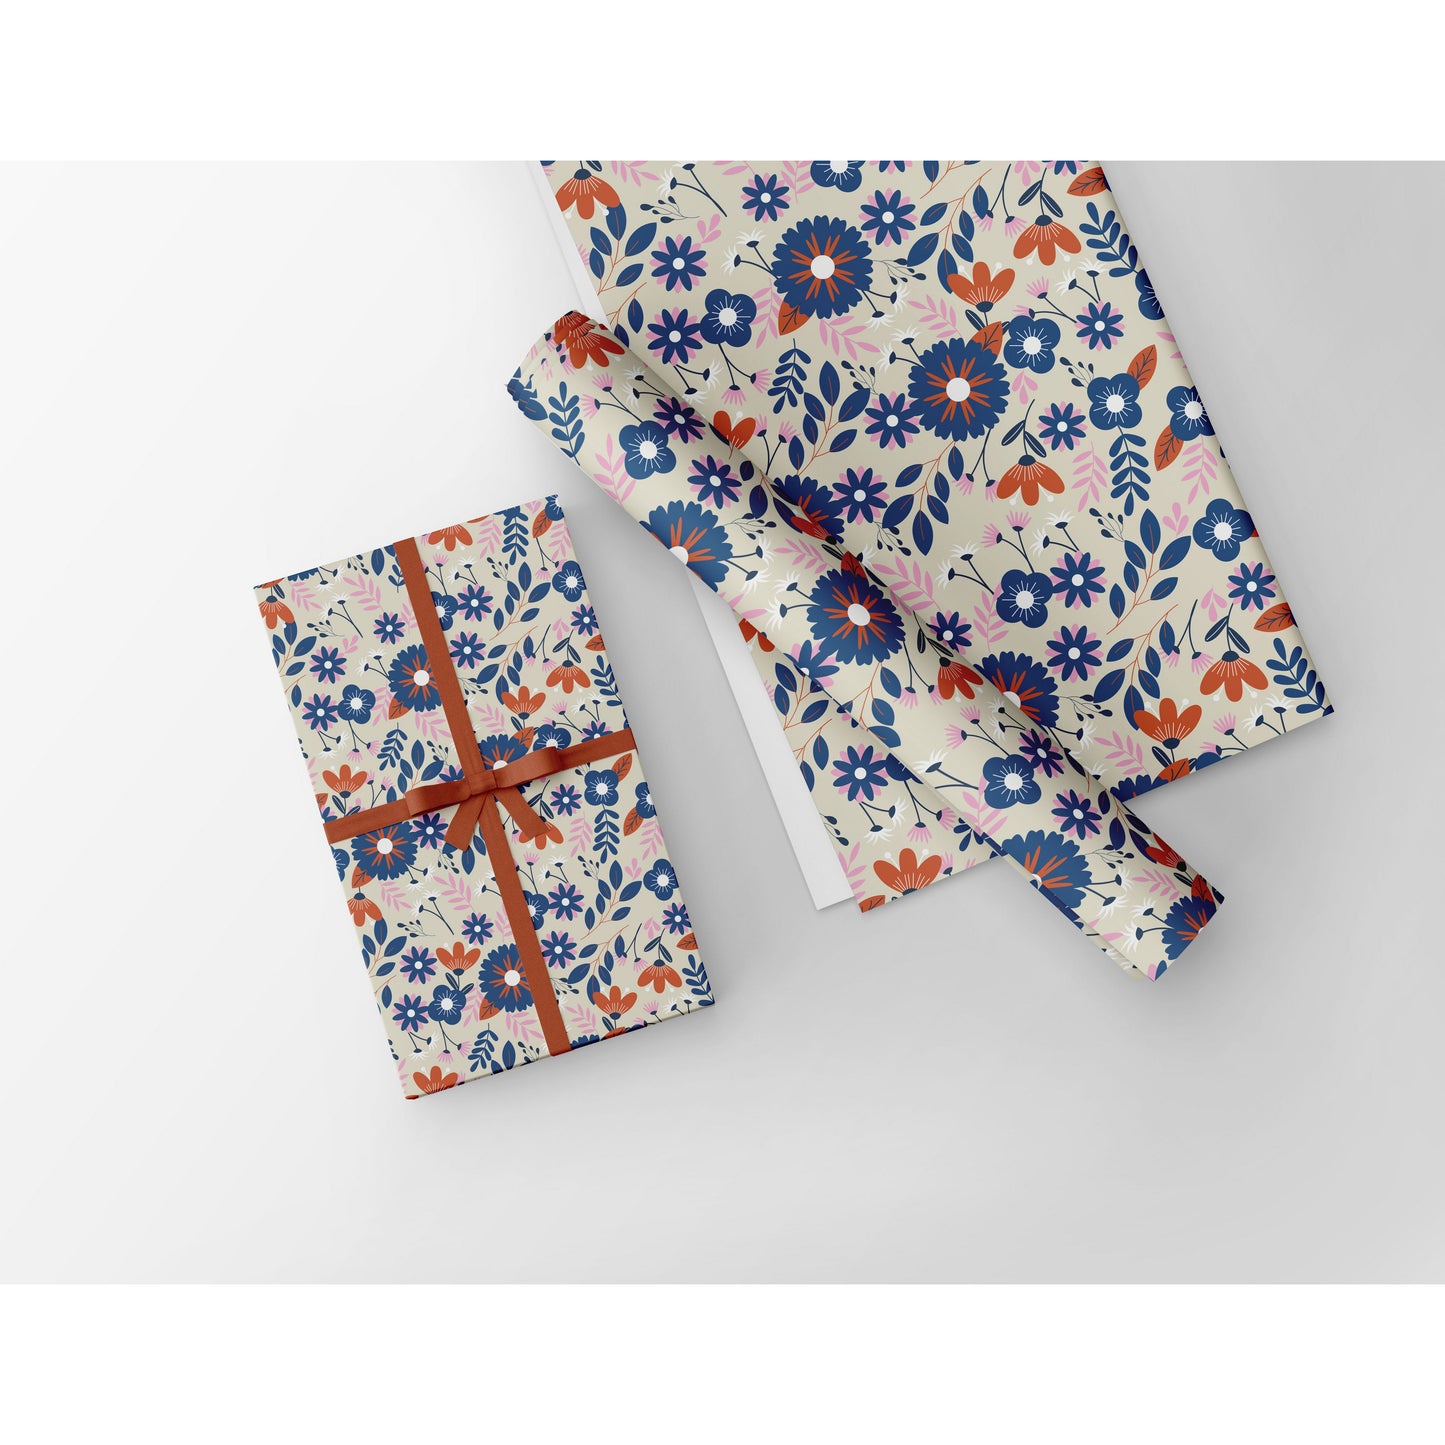 Retro Floral Gift Wrapping Paper (Pack of 5 Sheets)